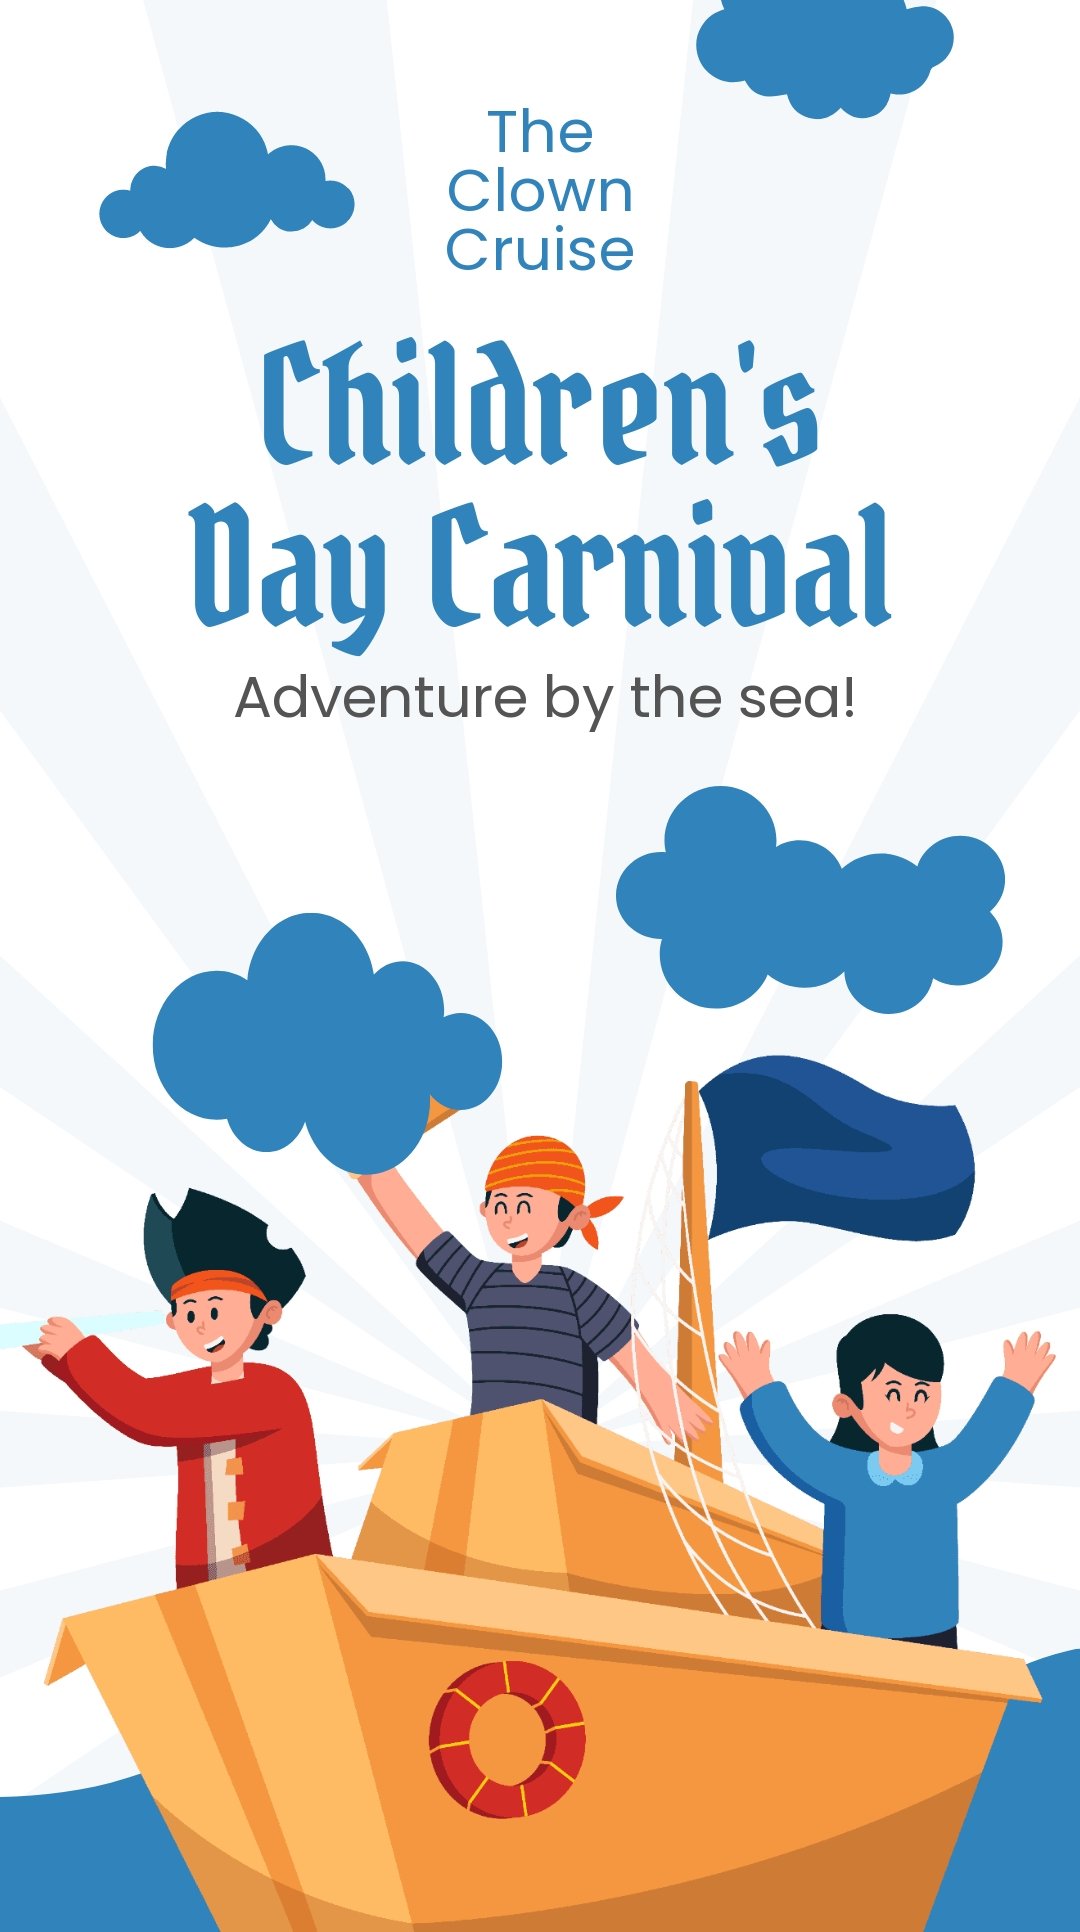 Free Children's Day Carnival Instagram Story Template